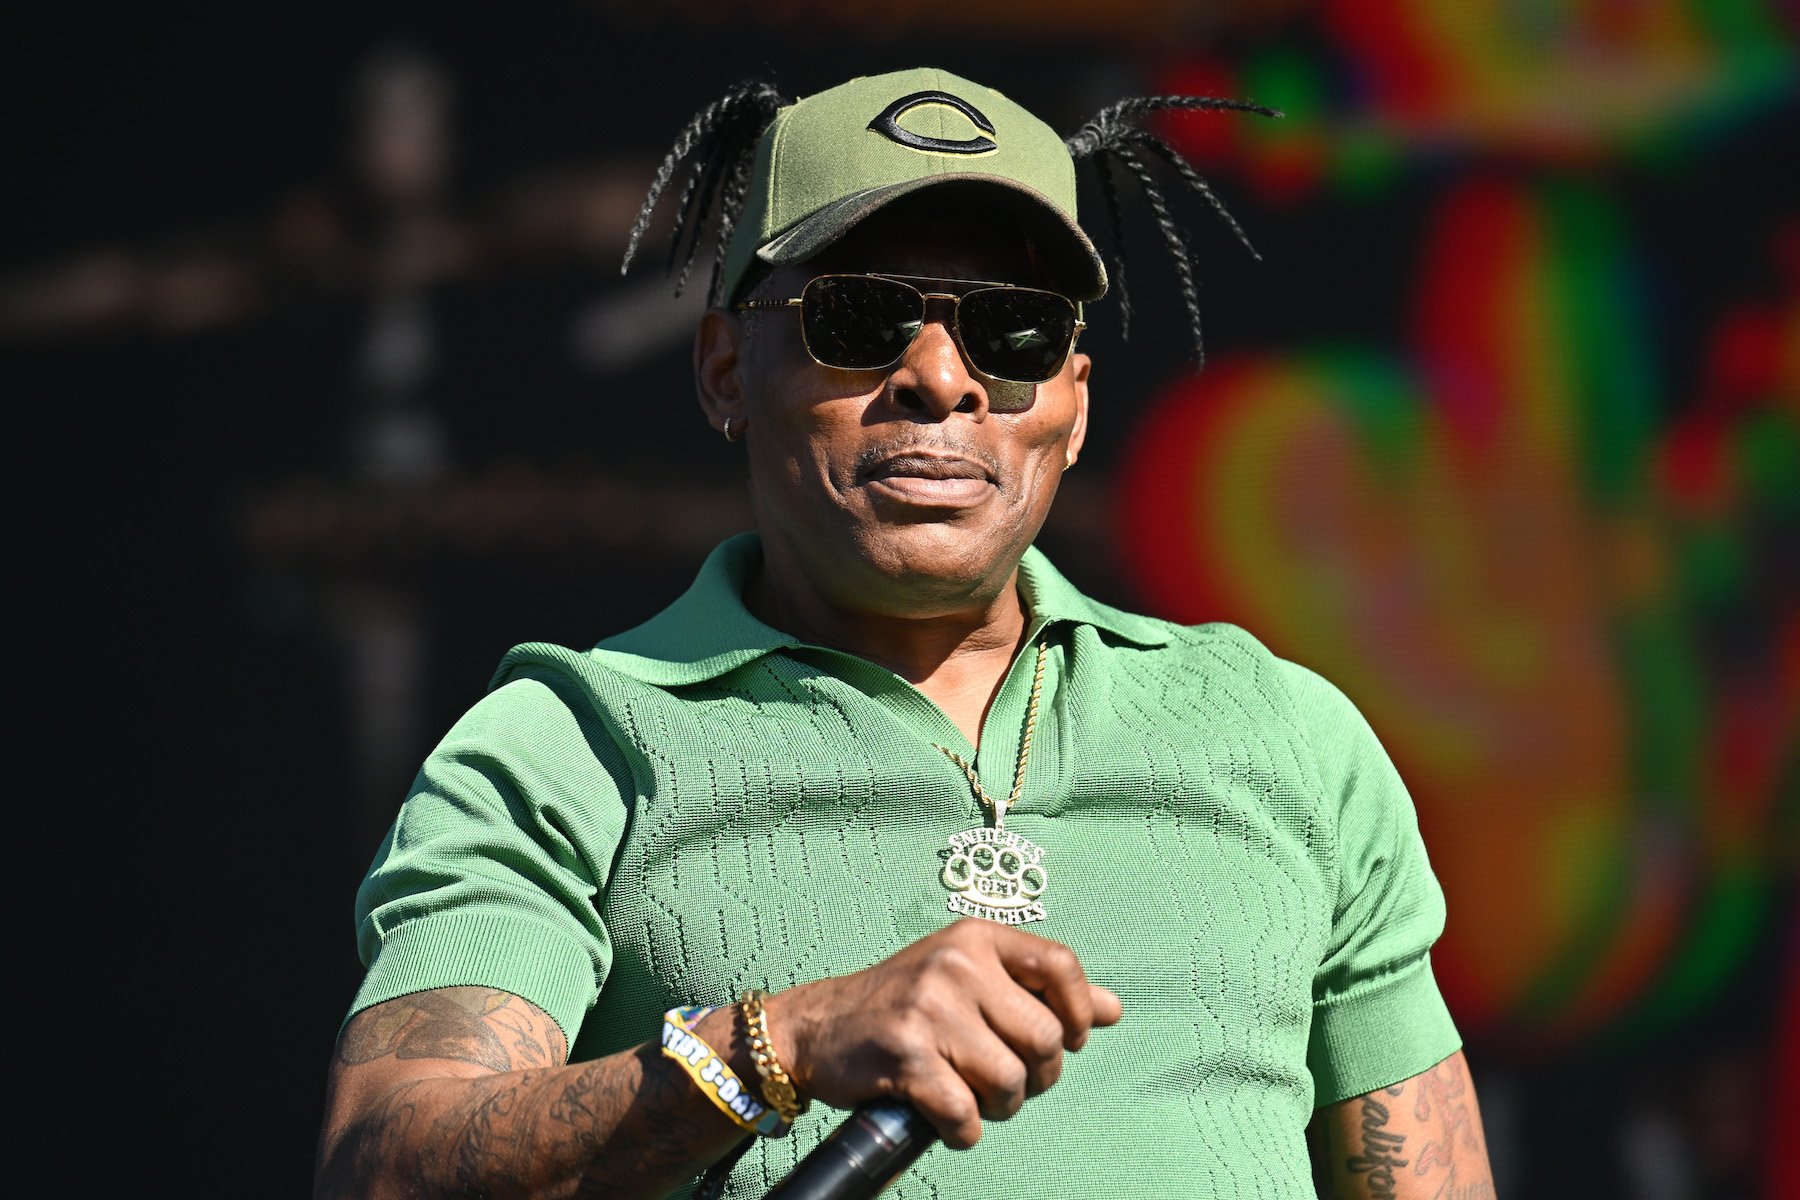 Coolio, seen here wearing green, who did the theme song for a beloved Nickelodeon show